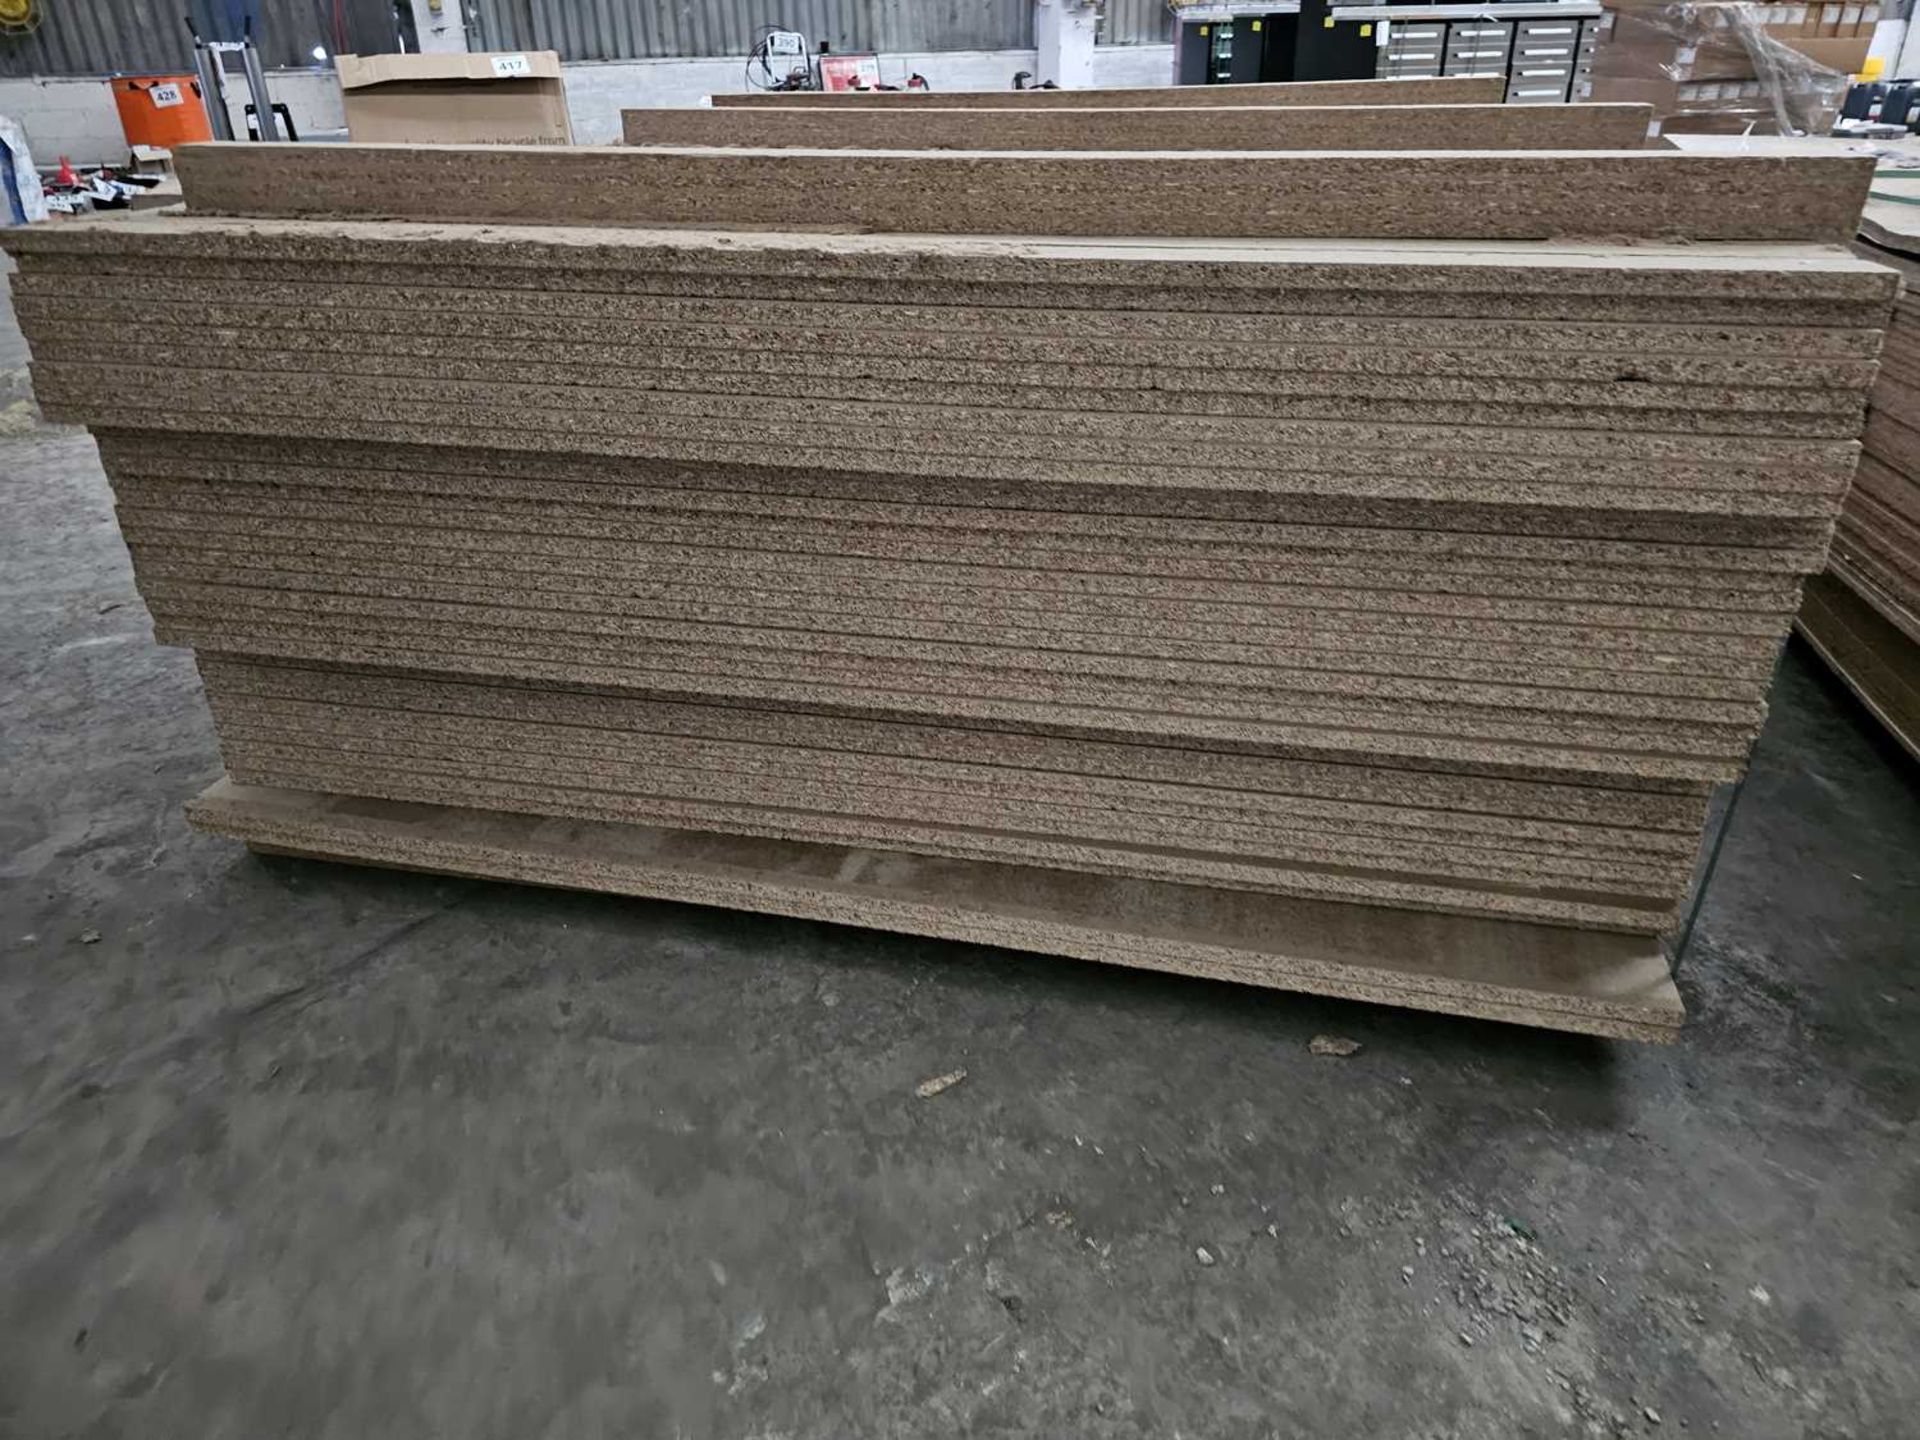 Selection of Chip Board Sheets (243cm x 189cm x 20mm - 34 of) - Image 3 of 3